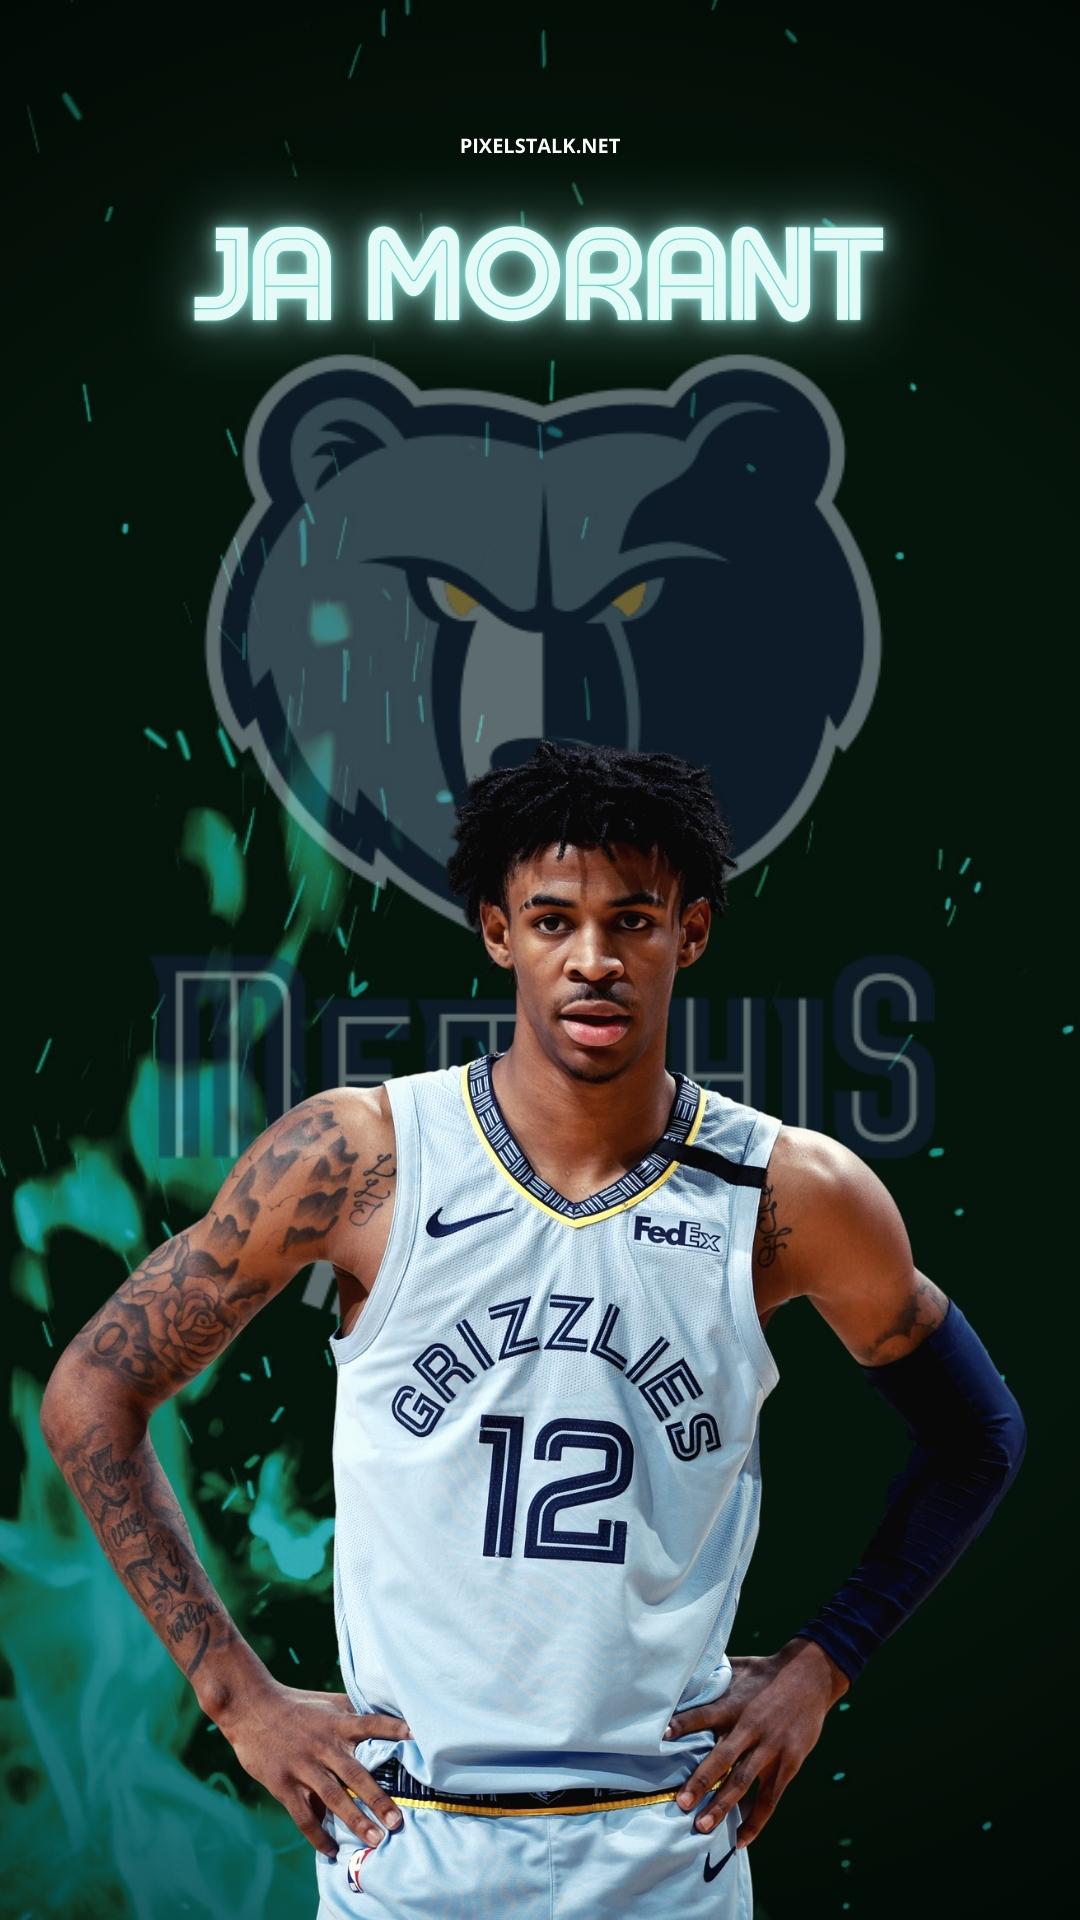 Hd Ja Morant Wallpaper Hd Ja Morant Wallpaper background in size 564x1002  with search words Cartoon Curry  Basketball art Nba wallpapers Jordan  logo wallpaper